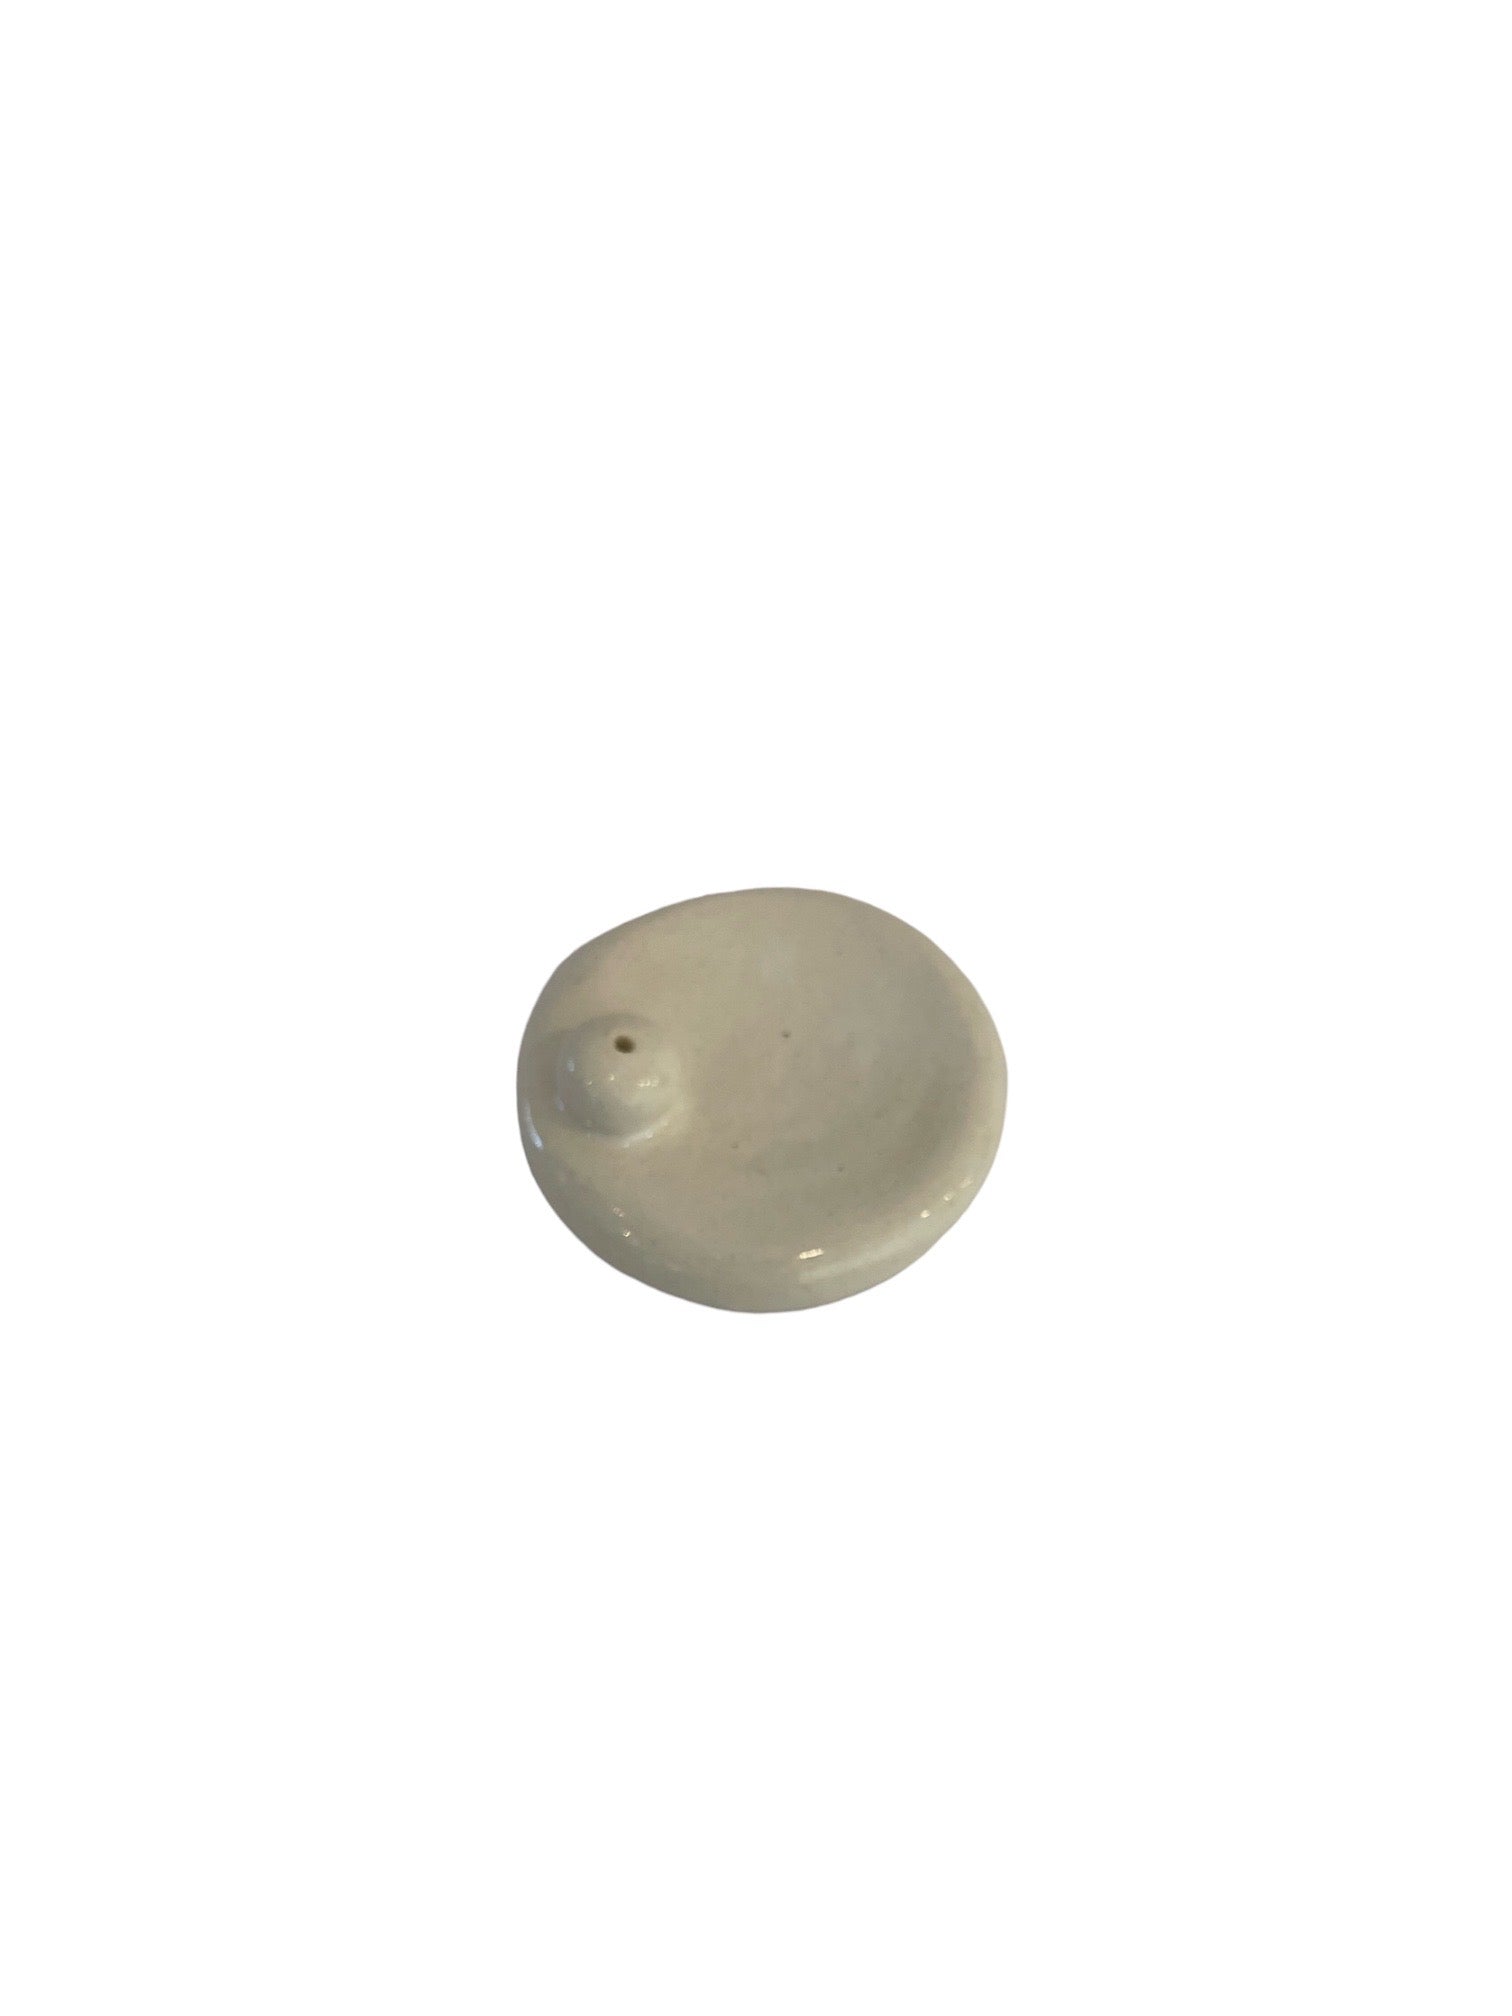 DOUBLE PEBBLE INCENSE HOLDER